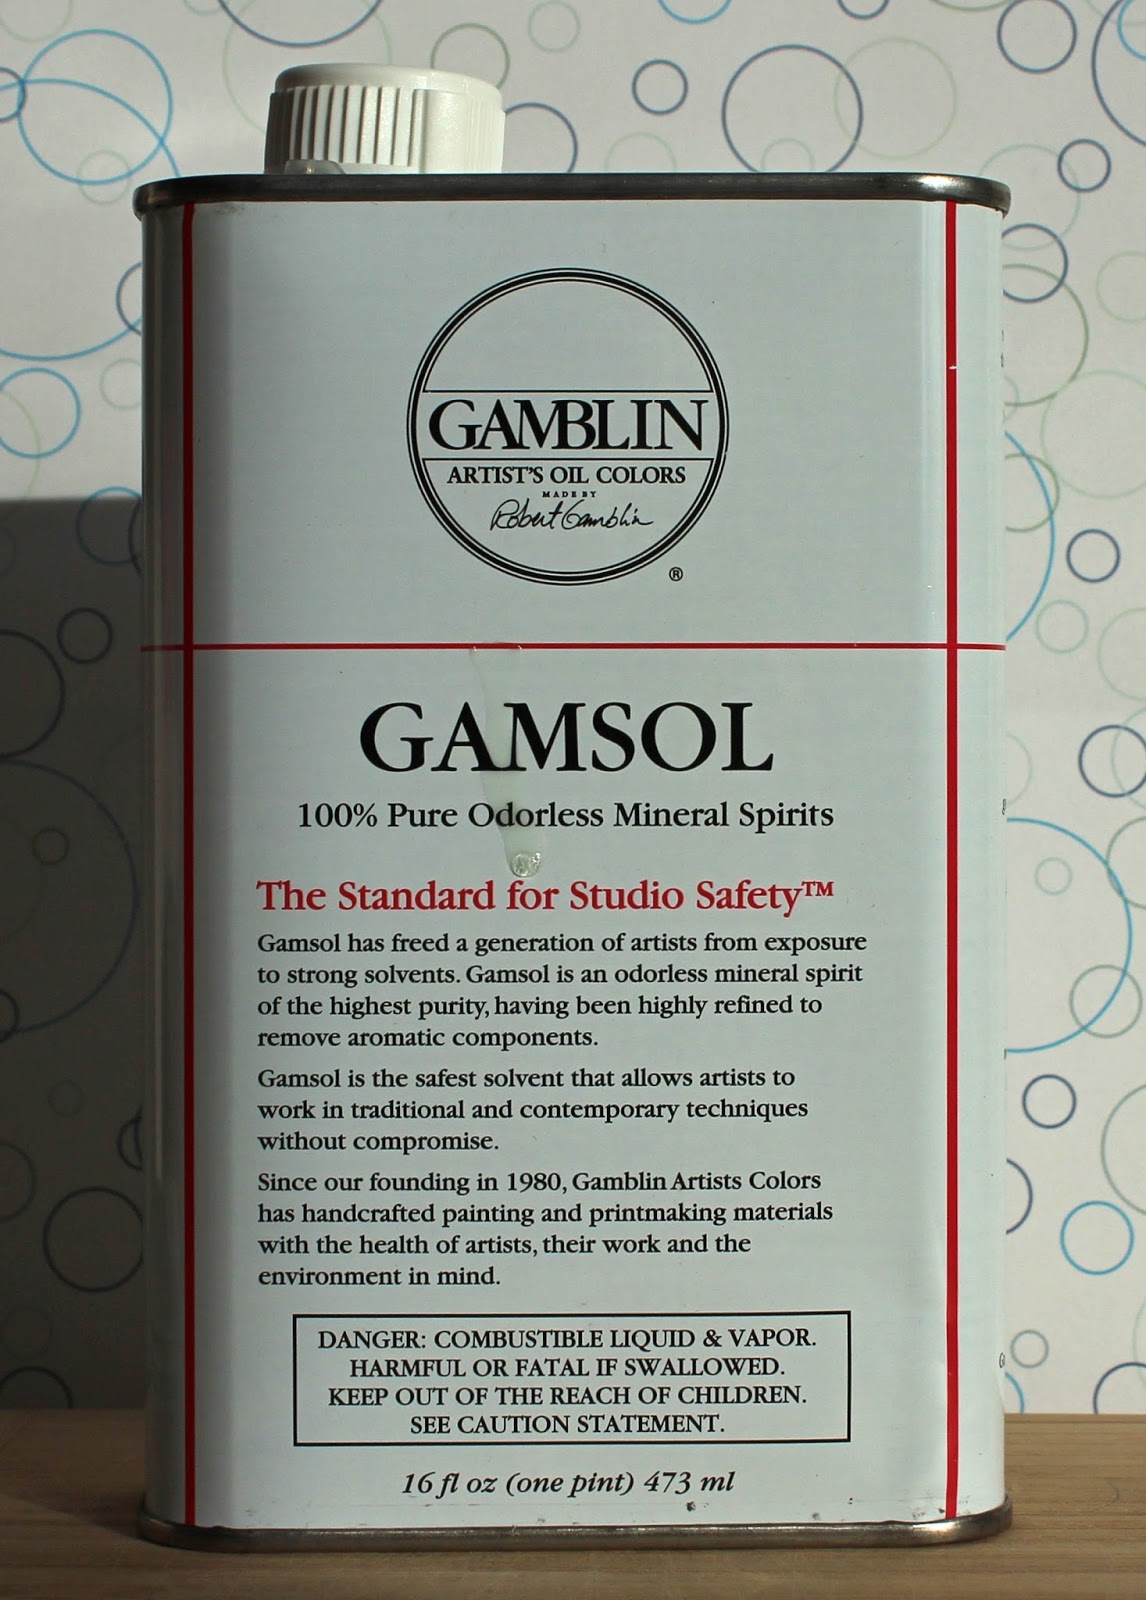 Gamsol - 4 Ounce